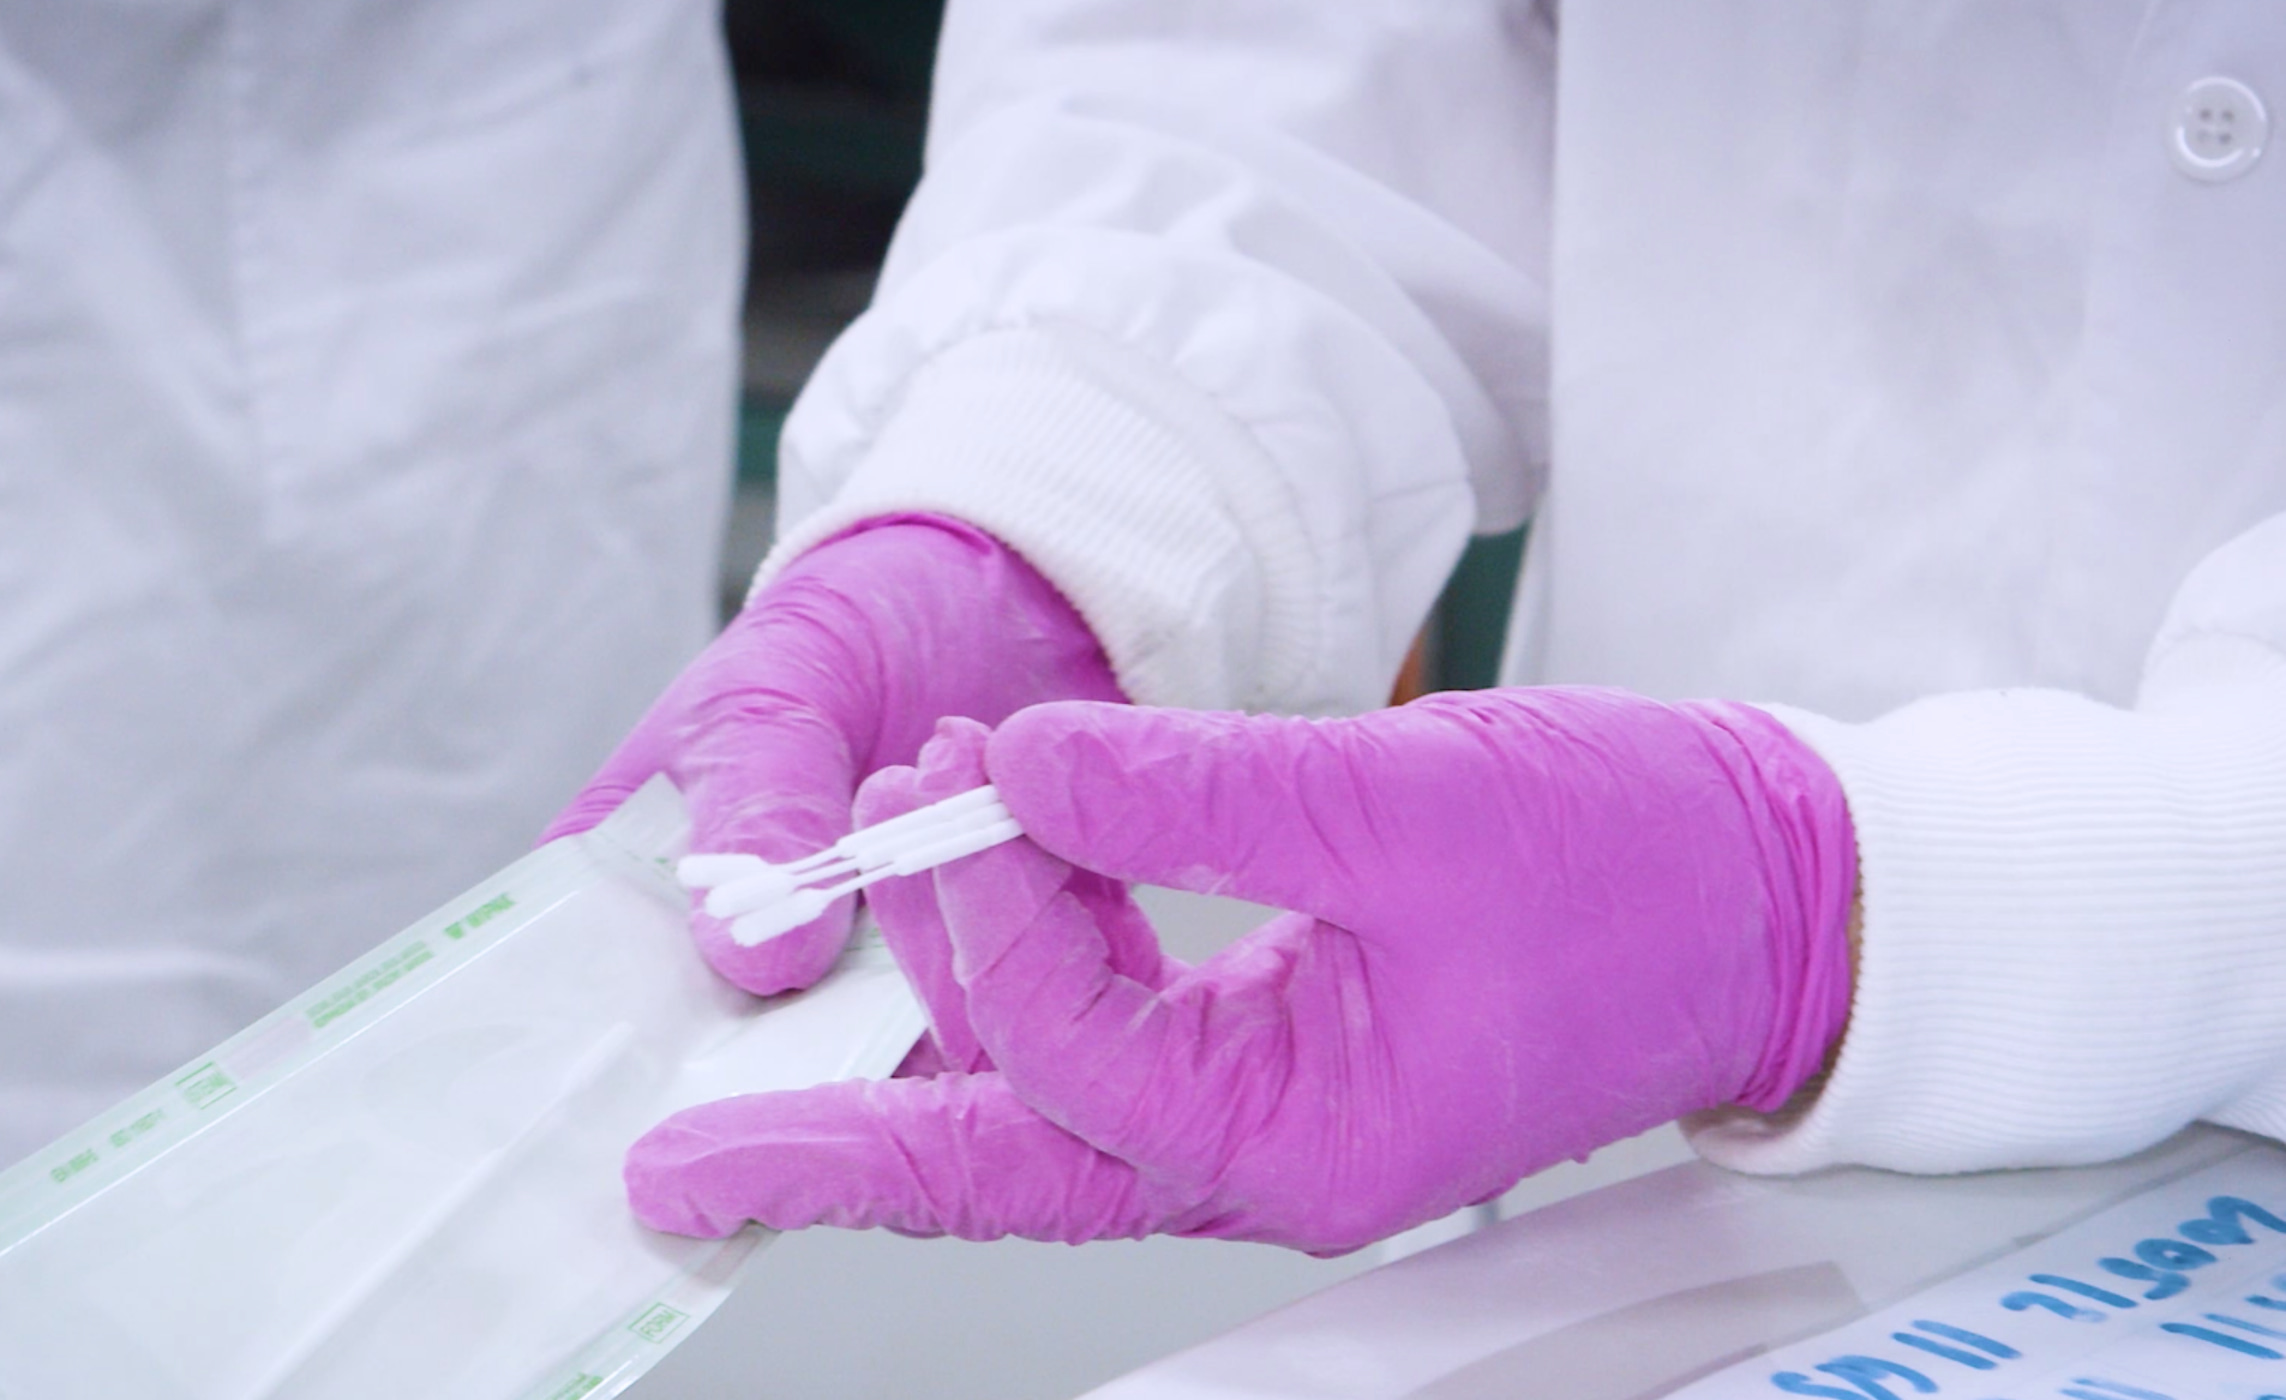 Image of the 3D printed swabs in the hands of a researcher.